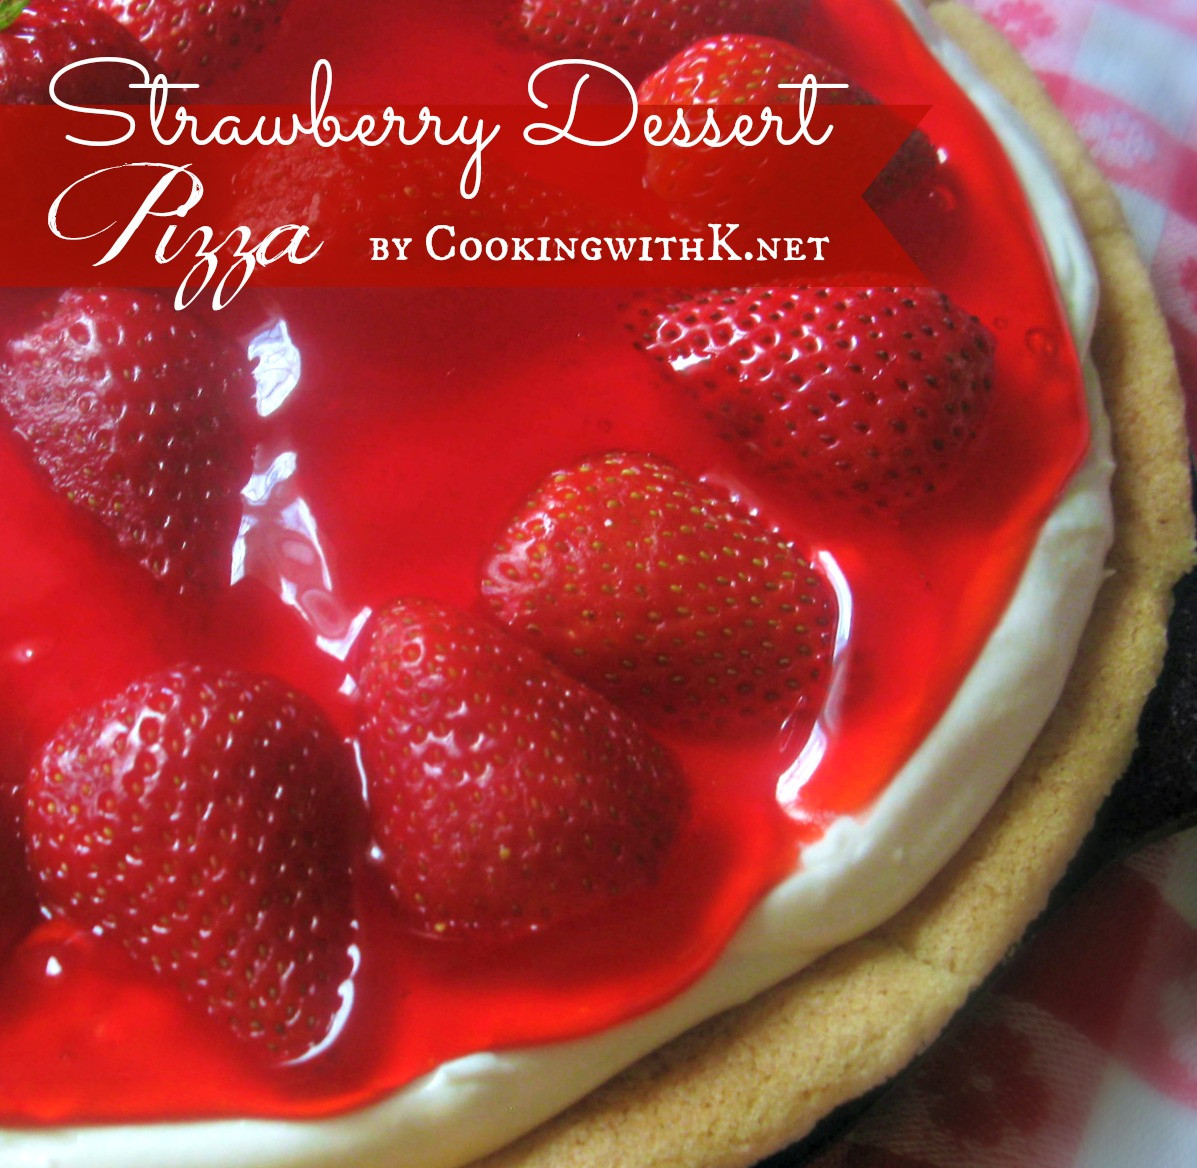 Delicious Easy Desserts
 Cooking with K A Delicious Dessert for July 4th Easy